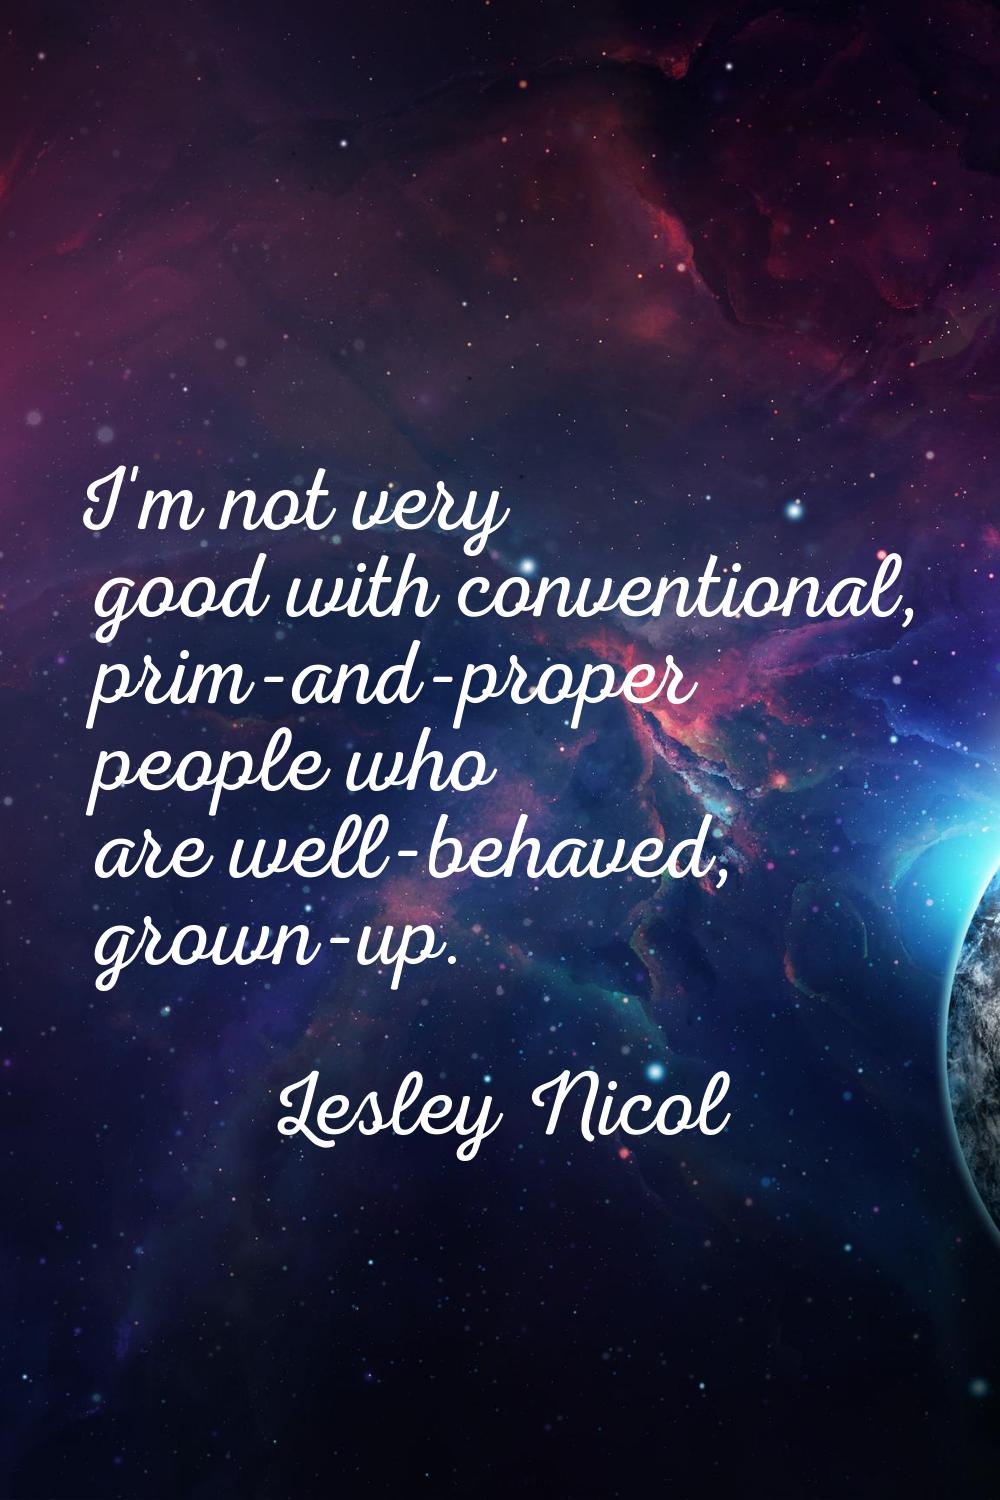 I'm not very good with conventional, prim-and-proper people who are well-behaved, grown-up.